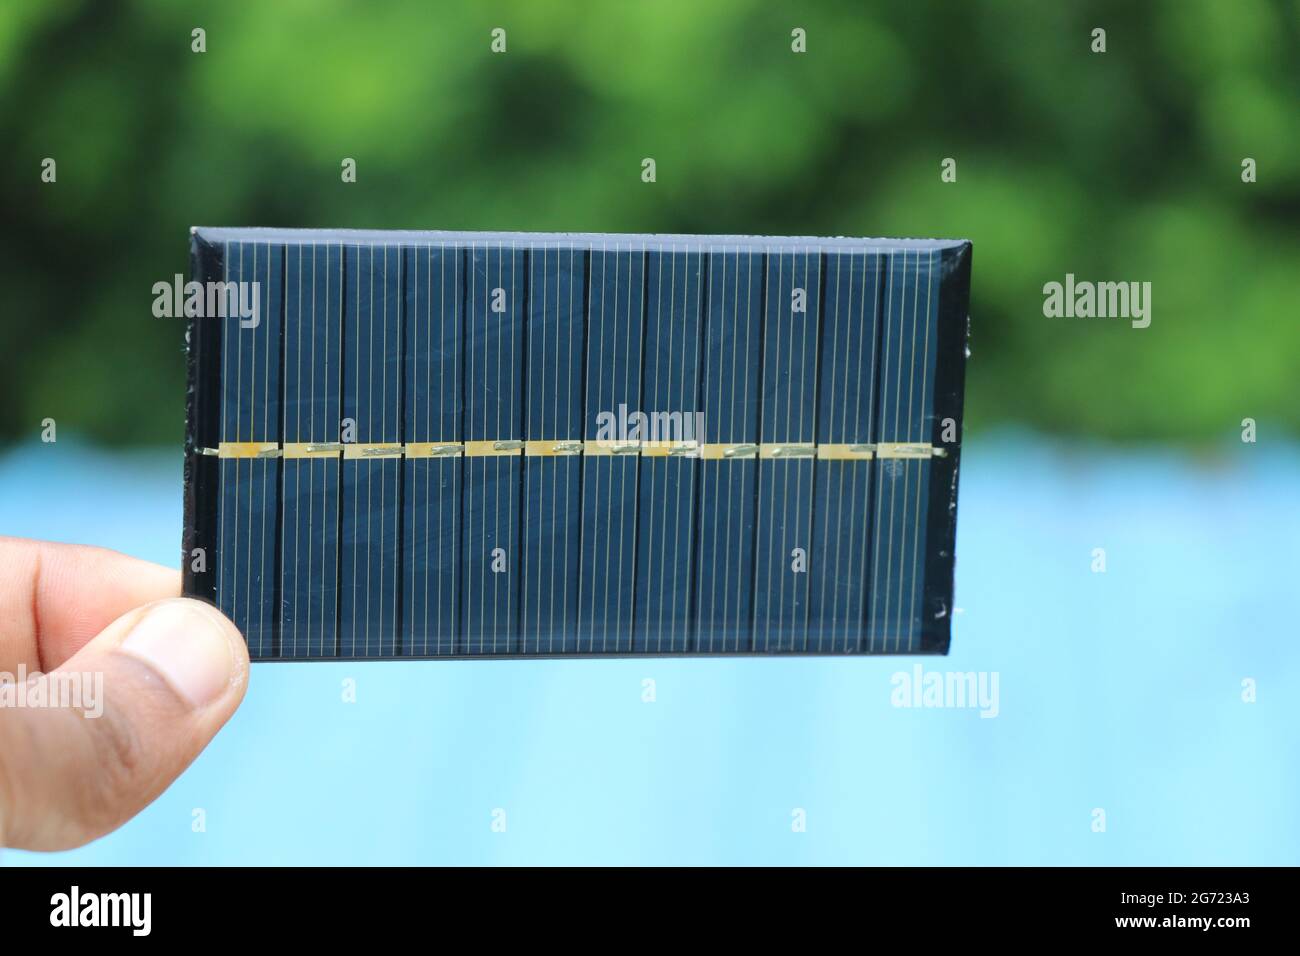 Mini Solar Cell Which can be used for small solar lamps, Mini solar cars, Solar Mobile Battery chargers and many more applications Stock Photo